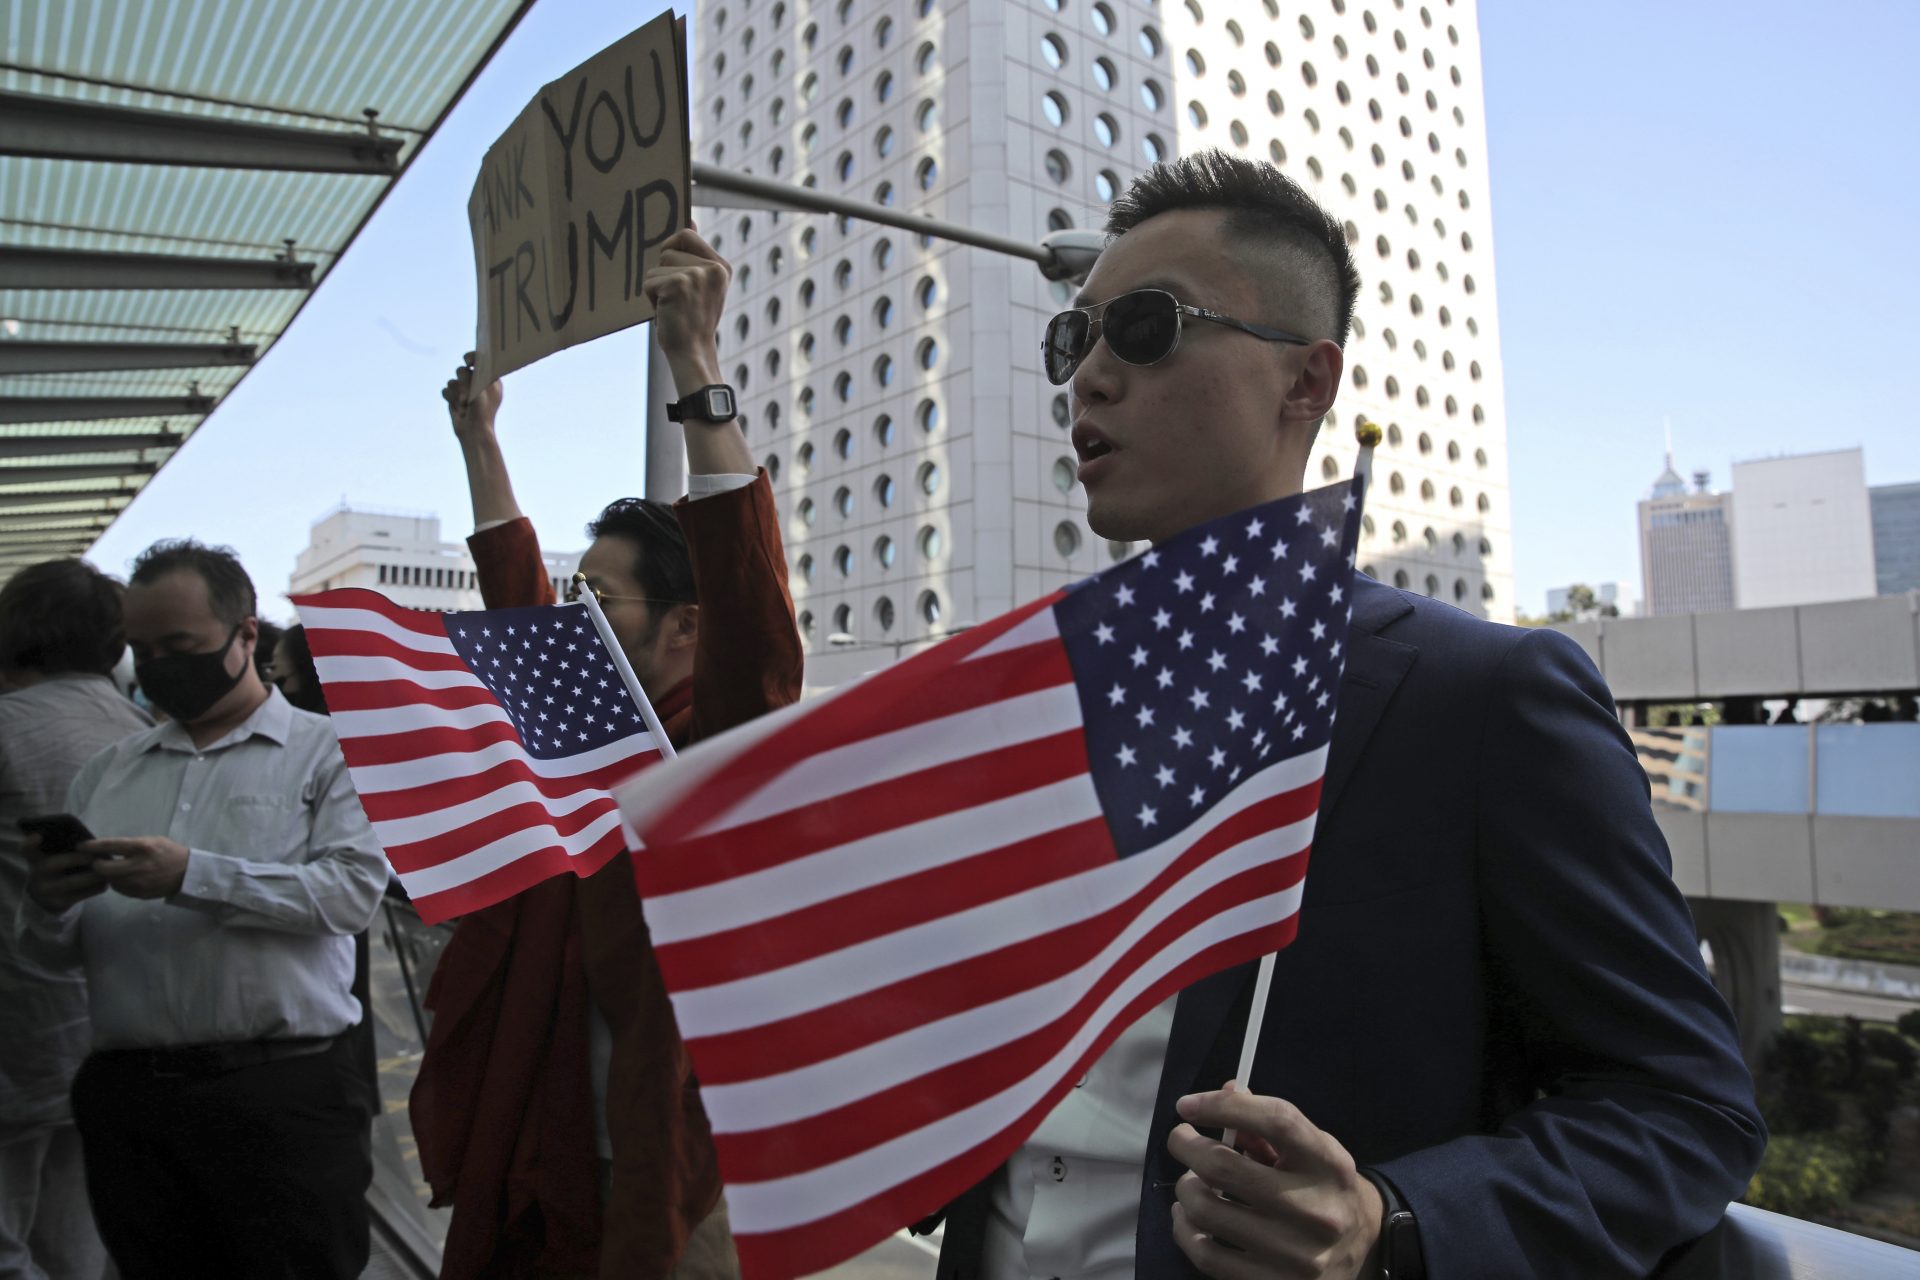 Protesters hold American flags and placard during a demonstration in Central, the financial district of Hong Kong, Thursday, Nov. 28, 2019. China reacted furiously to President Donald Trump's signing of two bills on Hong Kong human rights and said the U.S. will bear the unspecified consequences. A foreign ministry statement Thursday repeated heated condemnations of the laws and said China will counteract. It said all the people of Hong Kong and China oppose the move.